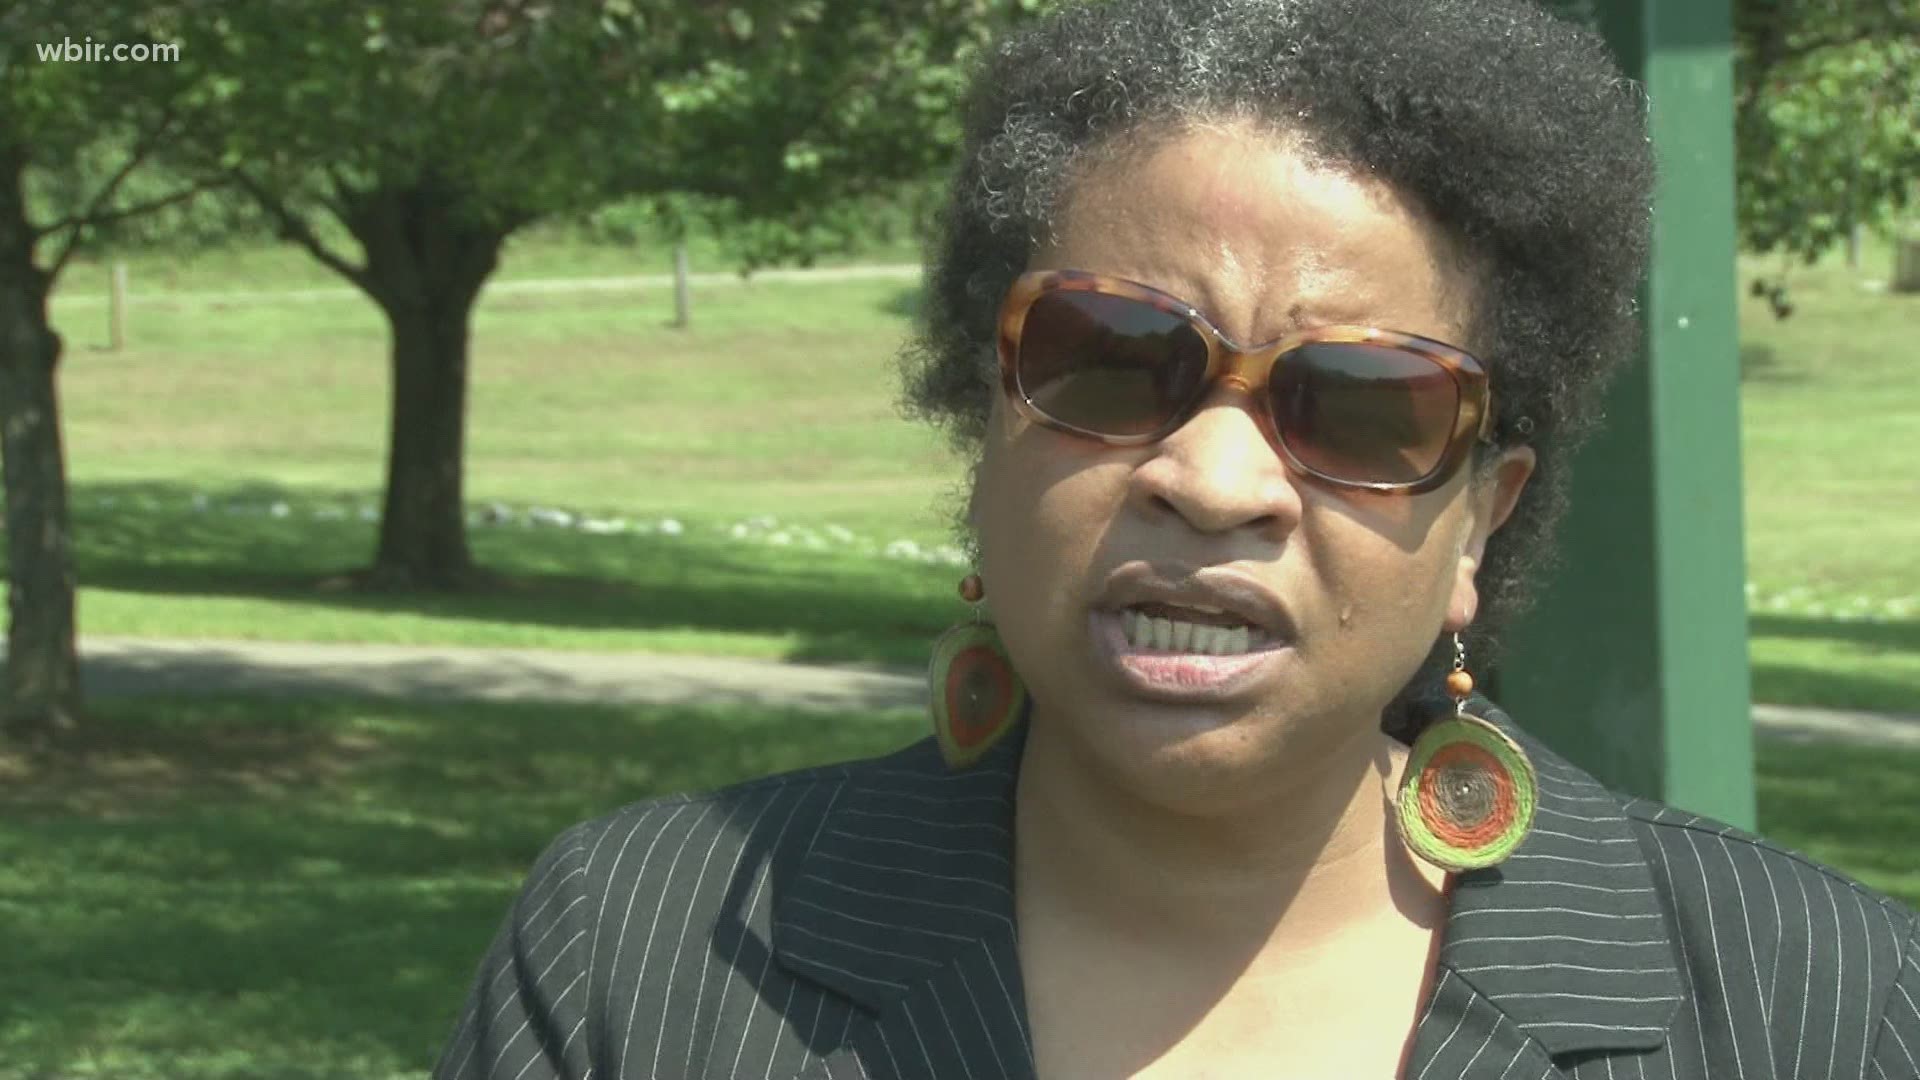 Knoxville City Councilwoman Amelia Parker on Tuesday sought a zero tolerance policy regarding employee behavior and racism. The city instead will study its culture.